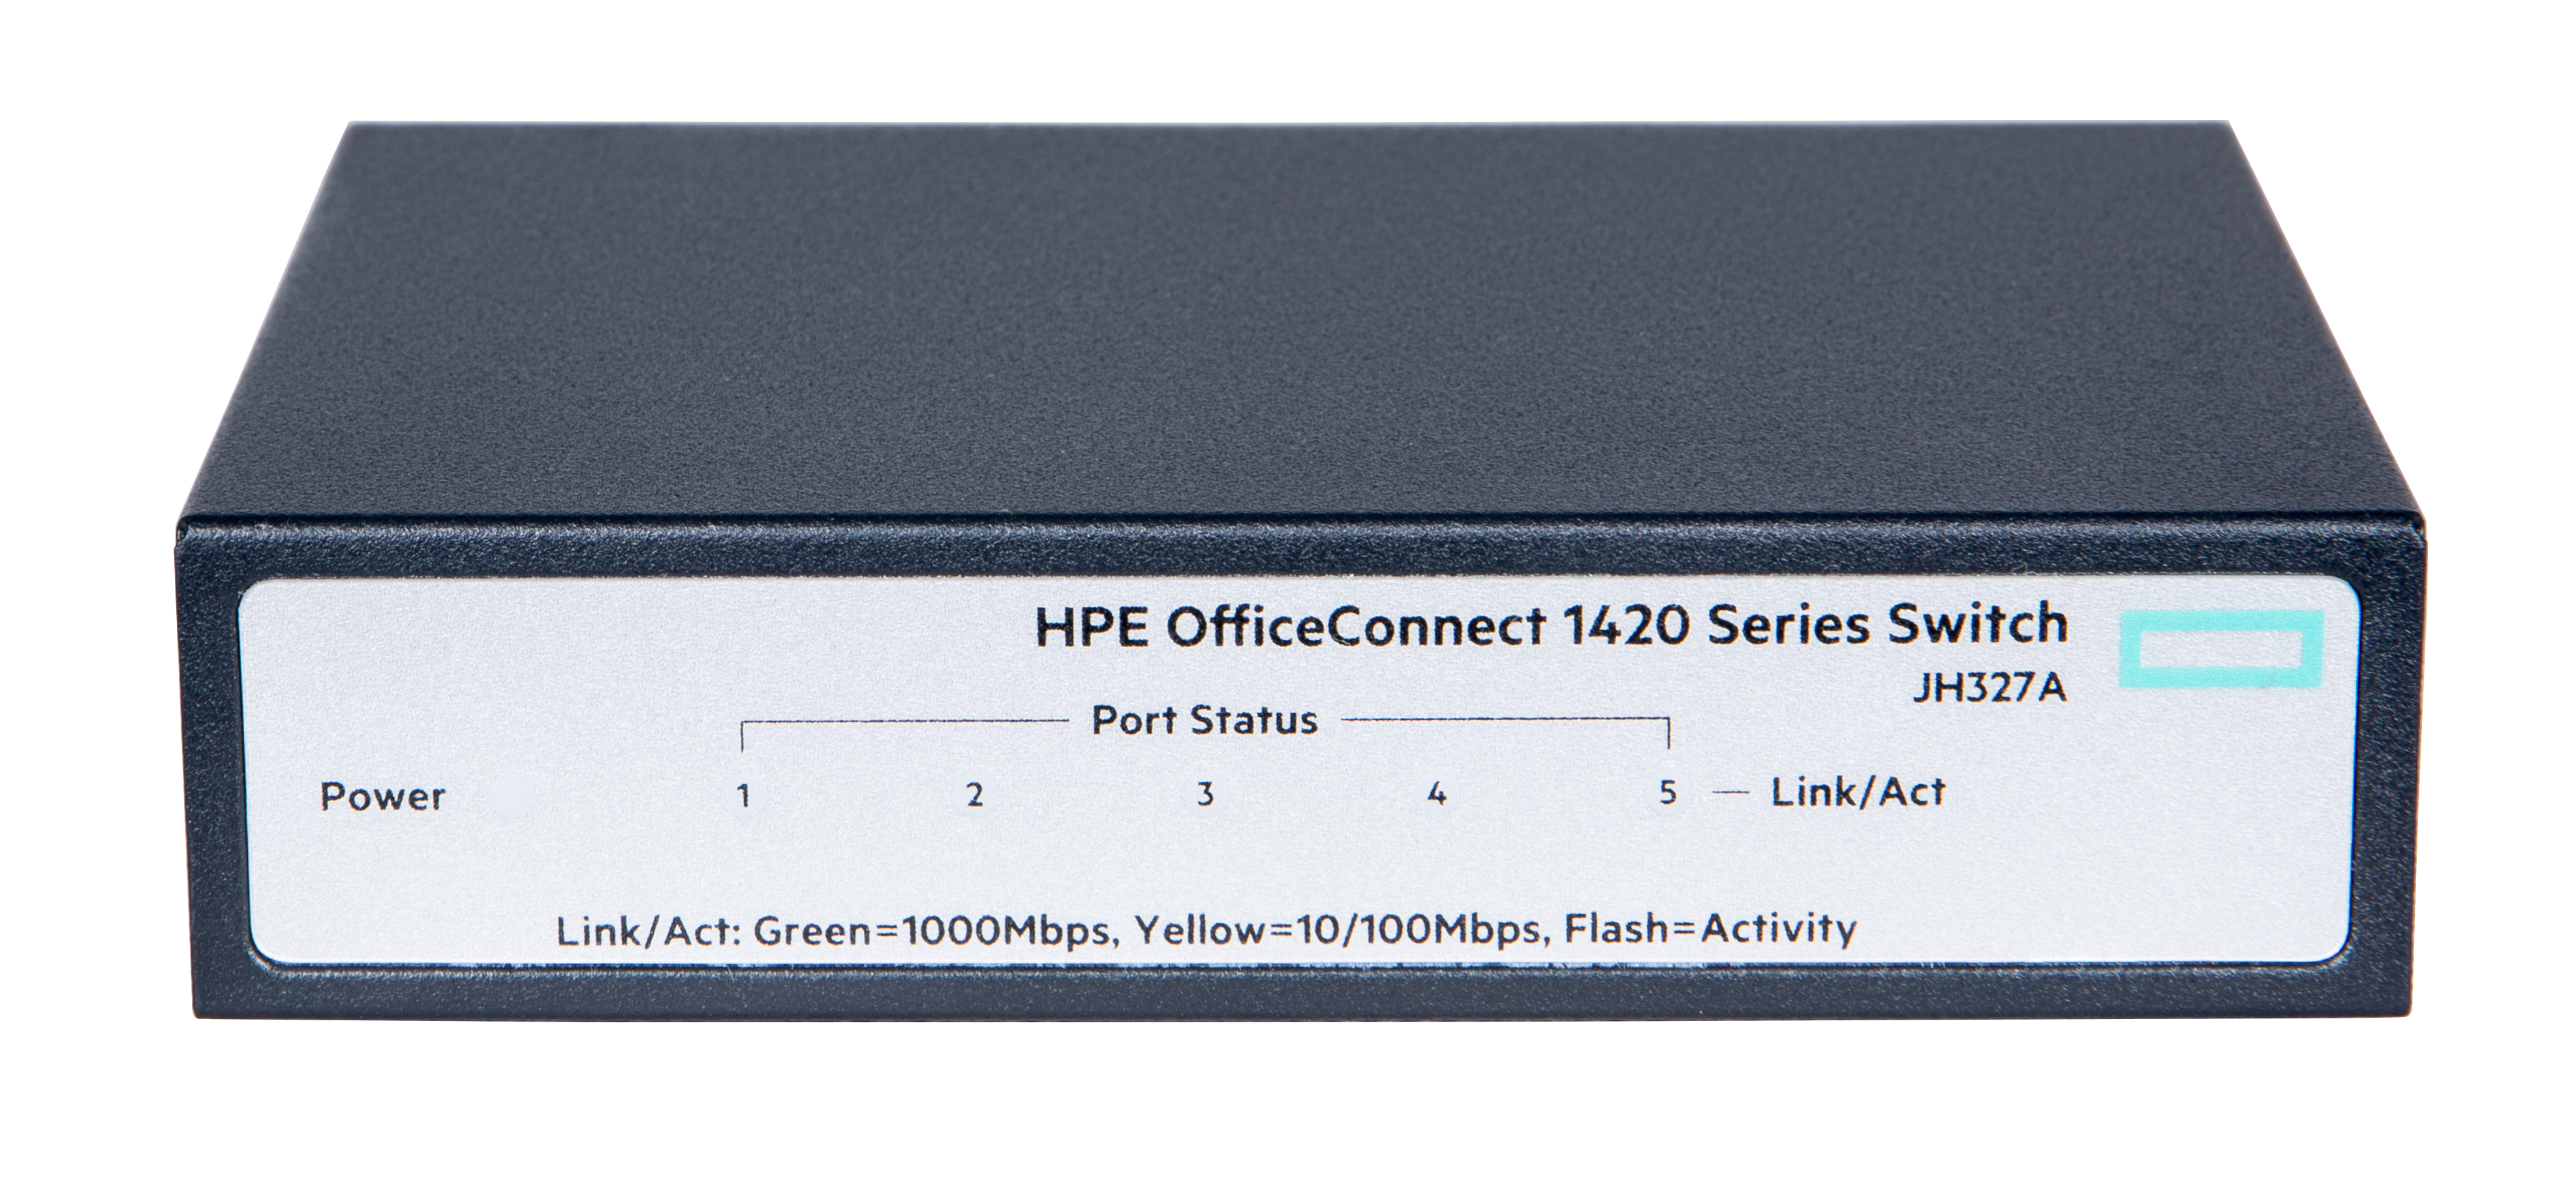 HPE OfficeConnect 1420 5G スイッチ